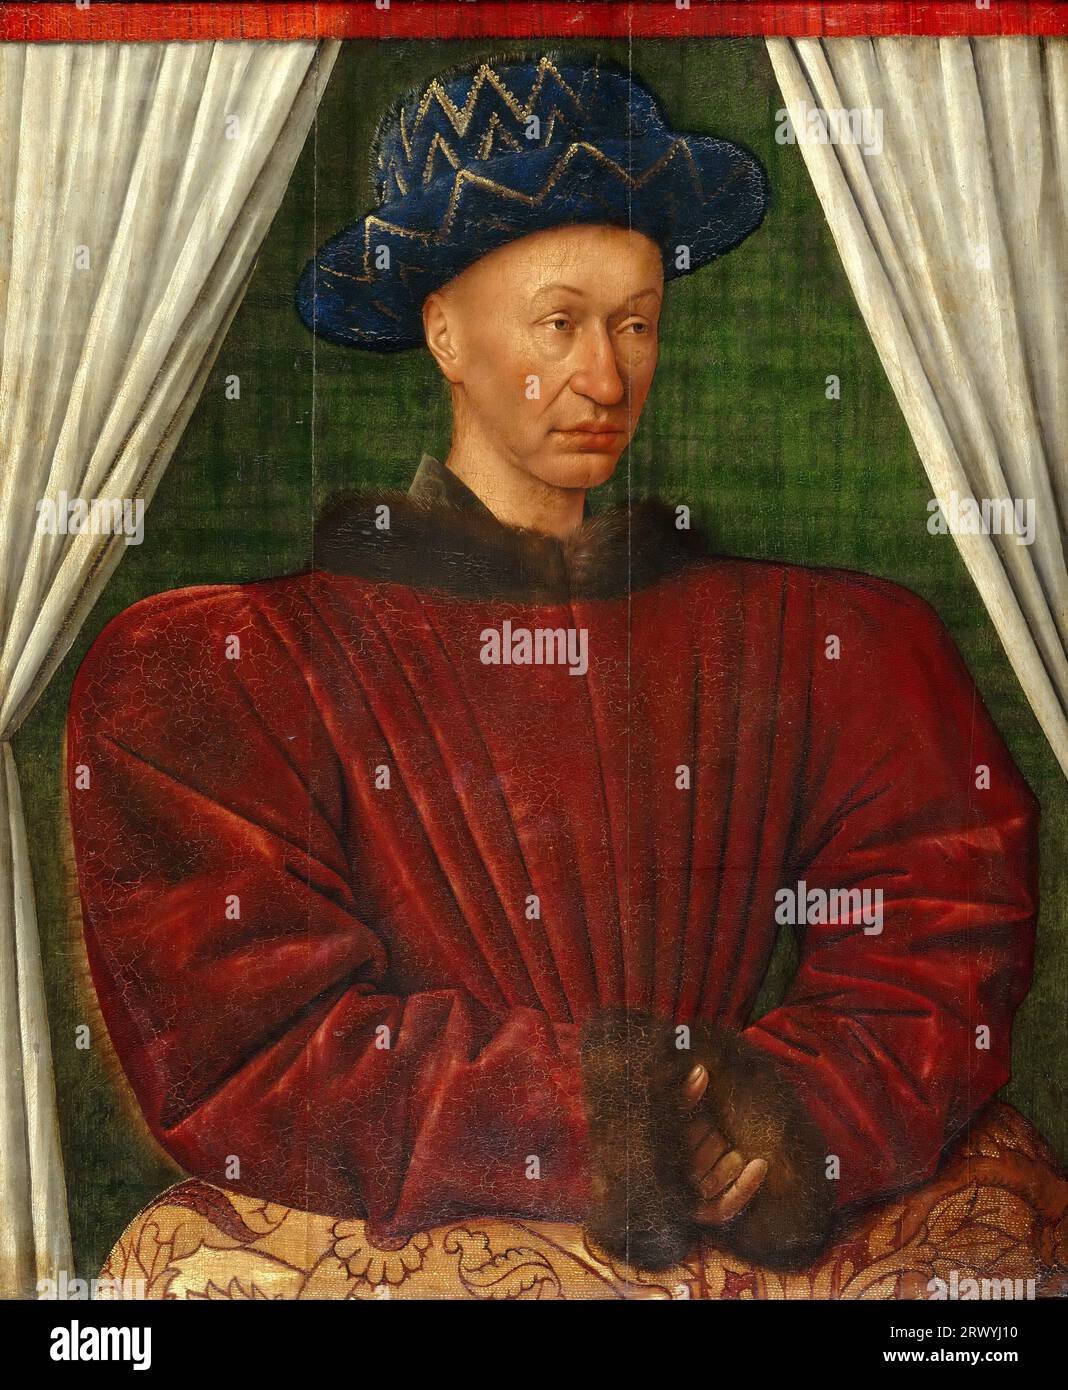 Charles VII (1403 – 1461), King of France from 1422 to 1461. Stock Photo